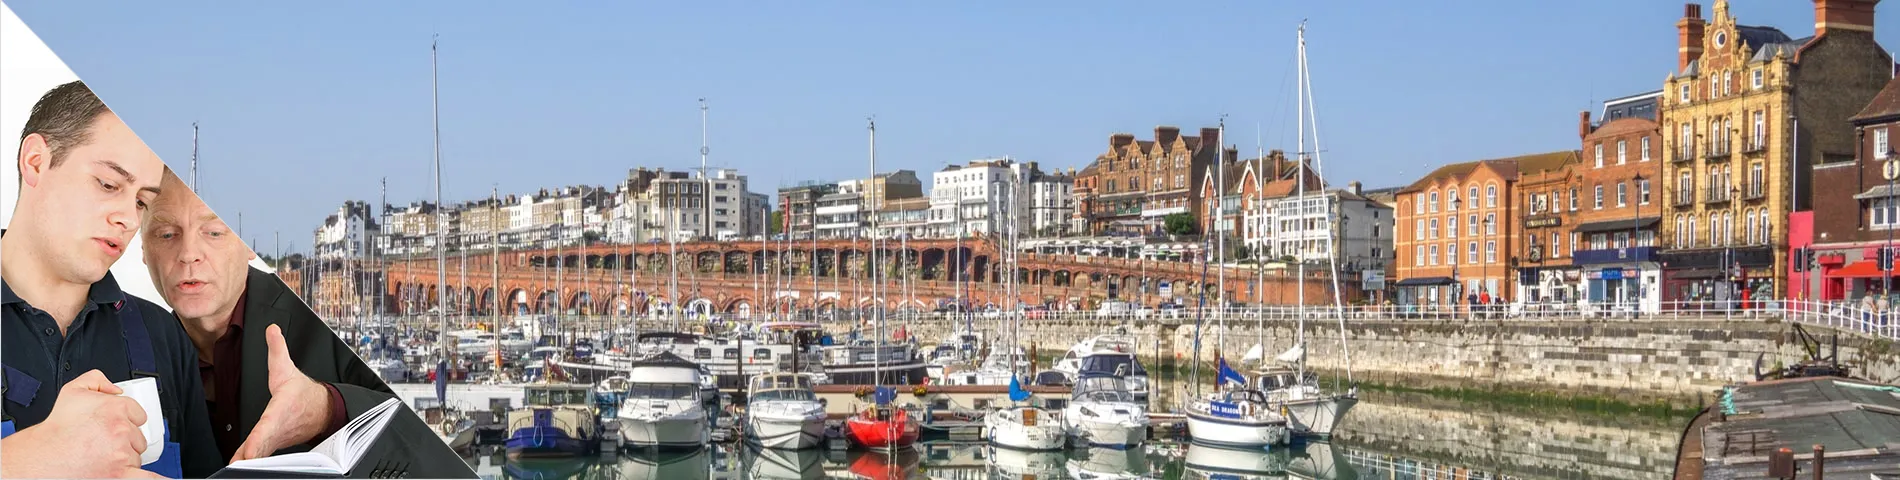 Ramsgate - One-to-One